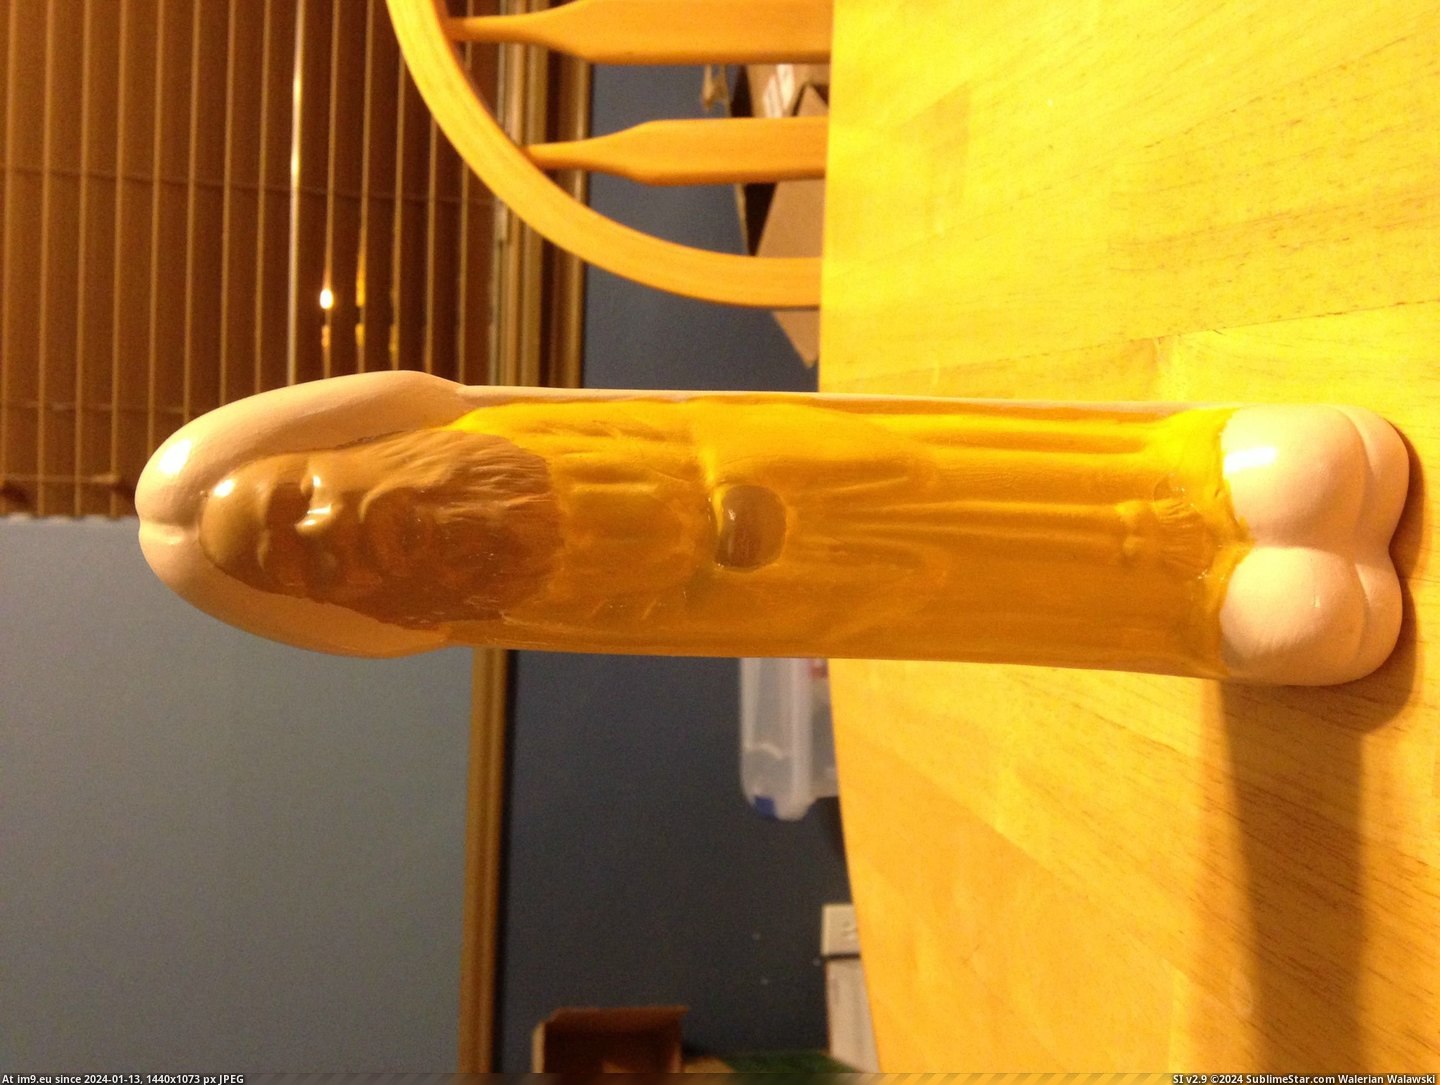 #Wtf #Art #Great #Out #Penis #Gave #Grandmother #Gifts #Got #She #Family #Boyfriend [Wtf] My Great-Grandmother got a boyfriend...so she made this penis art and gave it out as gifts to the family. [NSFW] 4 Pic. (Image of album My r/WTF favs))